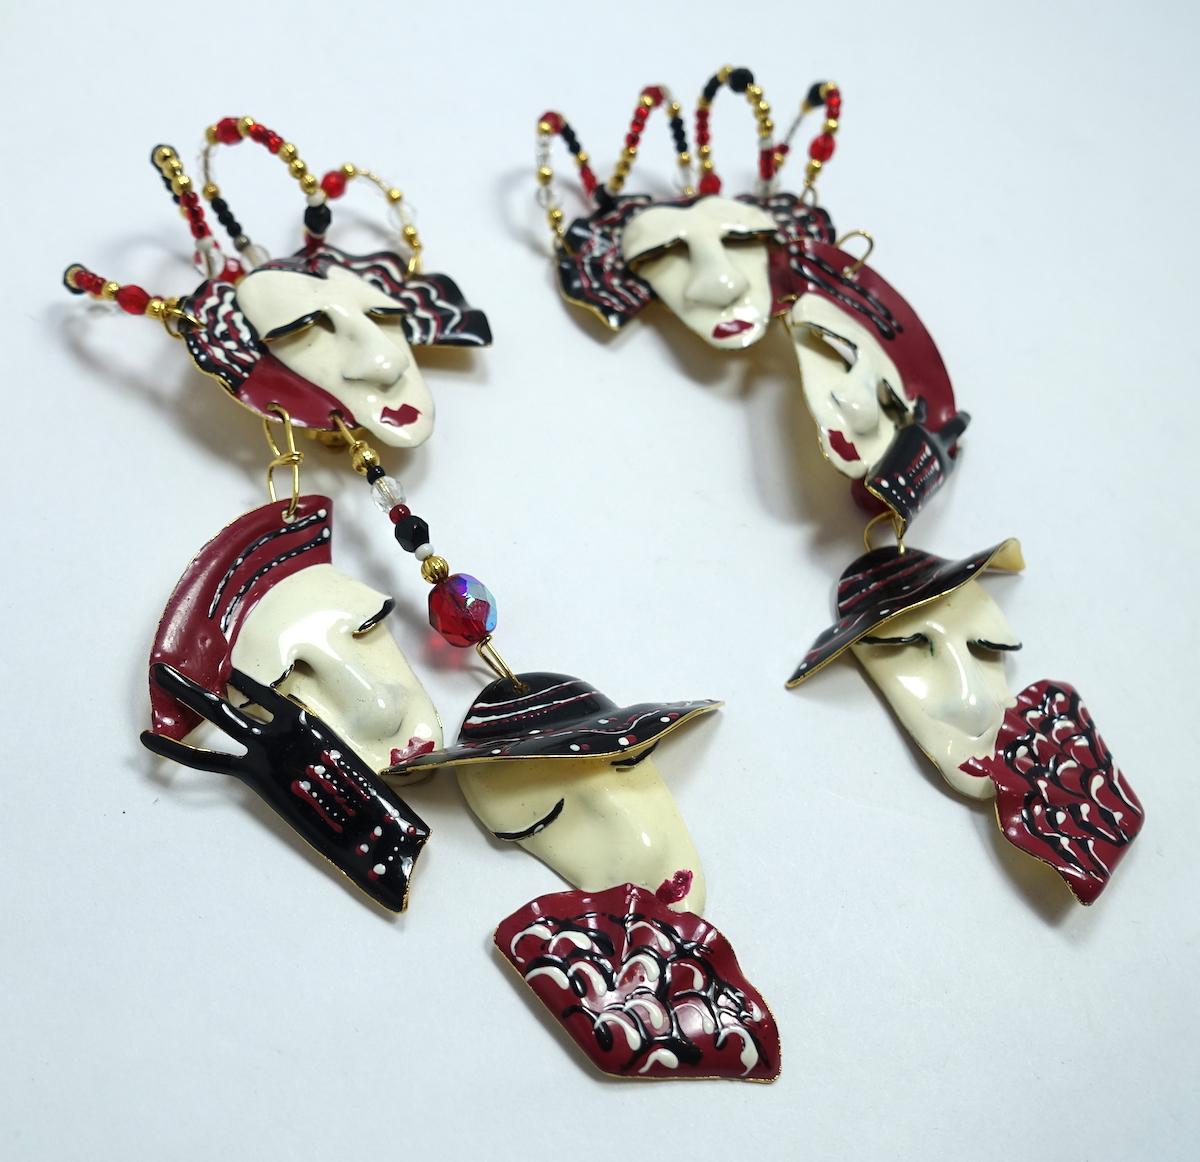 These vintage signed earrings feature multiple faces with black, ivory and red enameling and beads in a gold tone setting.  These clip earrings measure 5” x approx 2-1/2” and are signed “Lunch at the Ritz”.  They are in excellent condition.